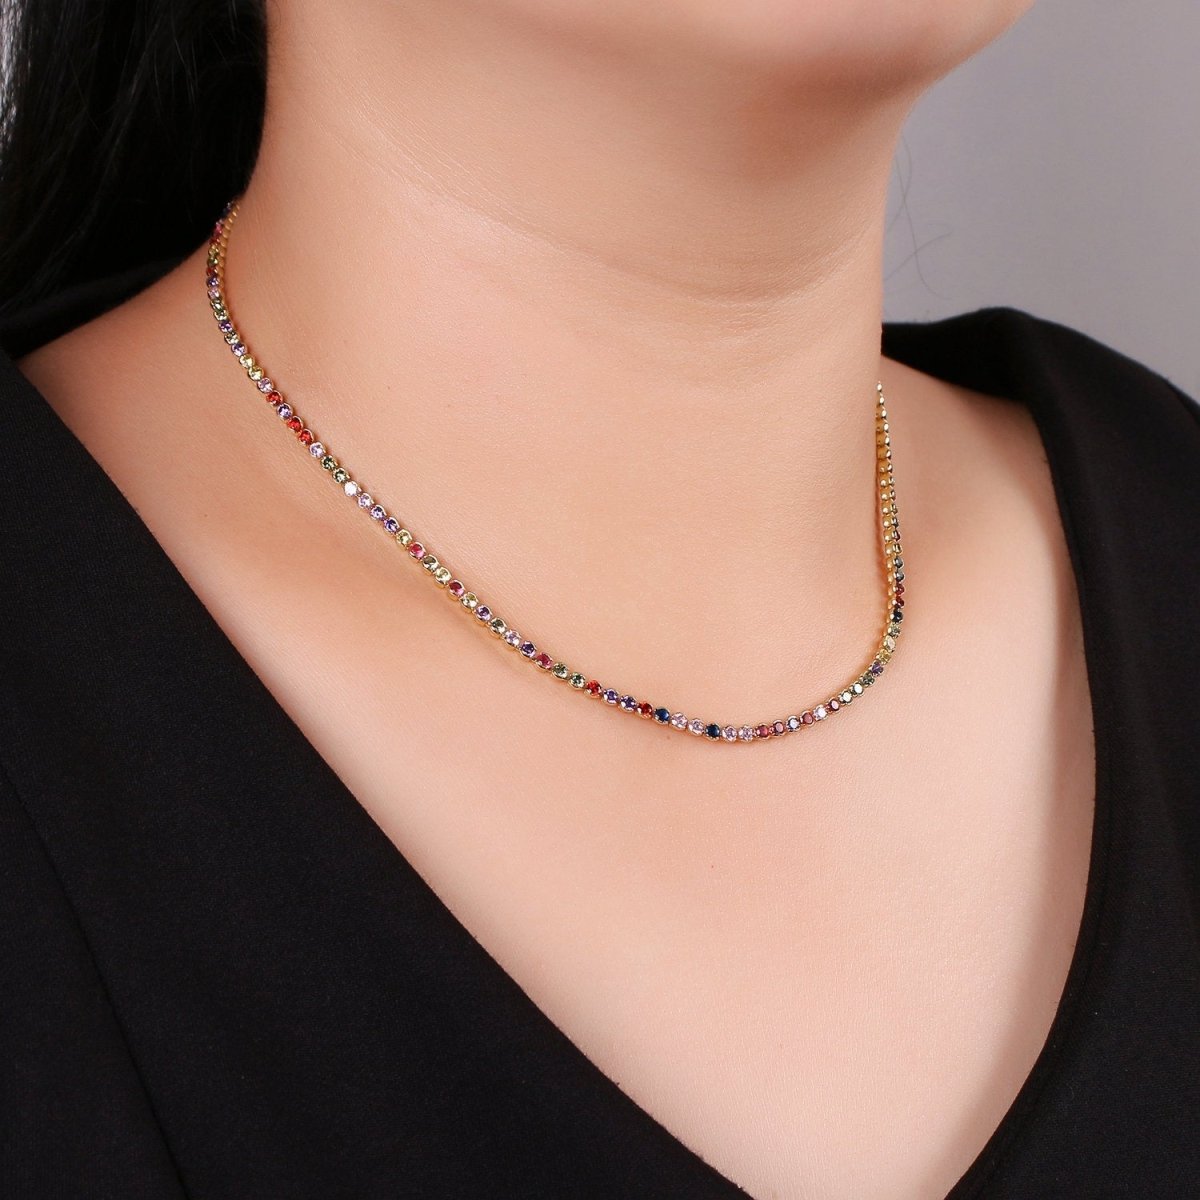 Micro Pave Tennis Chain / 14k Gold Filled / Micro Pave Choker Chain / Tennis Chain Choker Necklace Multi Color Rainbow CZ Chain | CN-779, CN-896 Clearance Pricing - DLUXCA